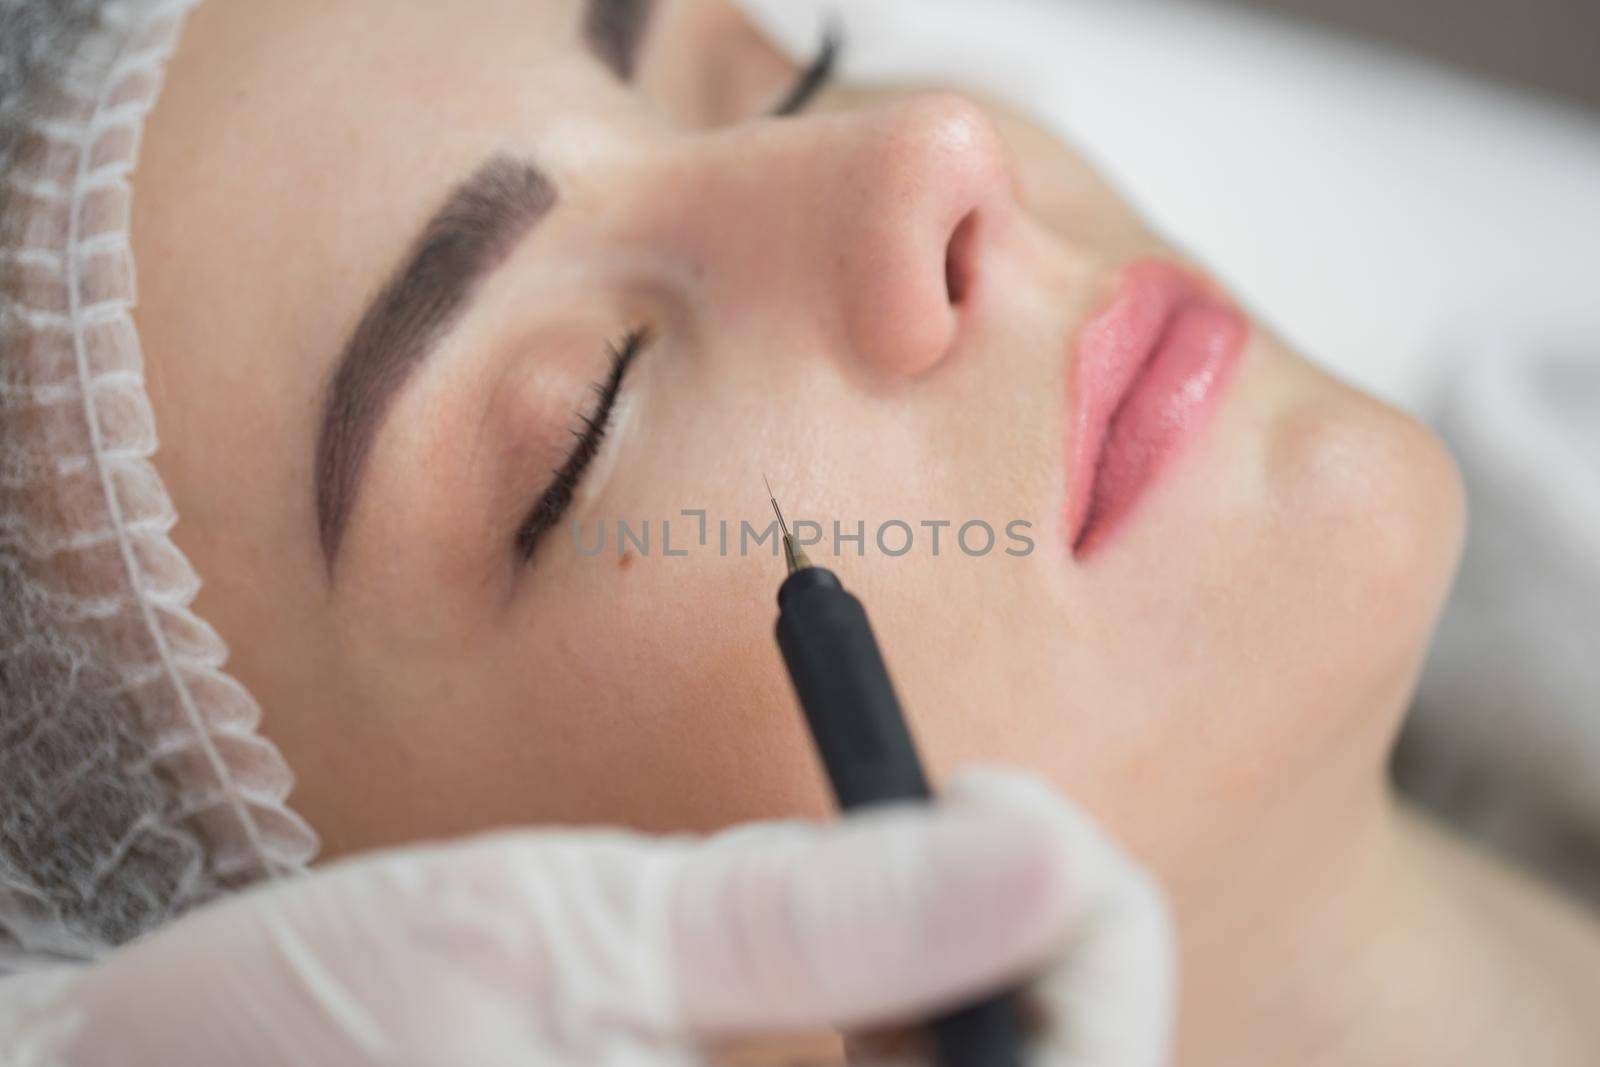 Ultrasonic cavitation, facial cleansing in the cosmetology office. by StudioPeace